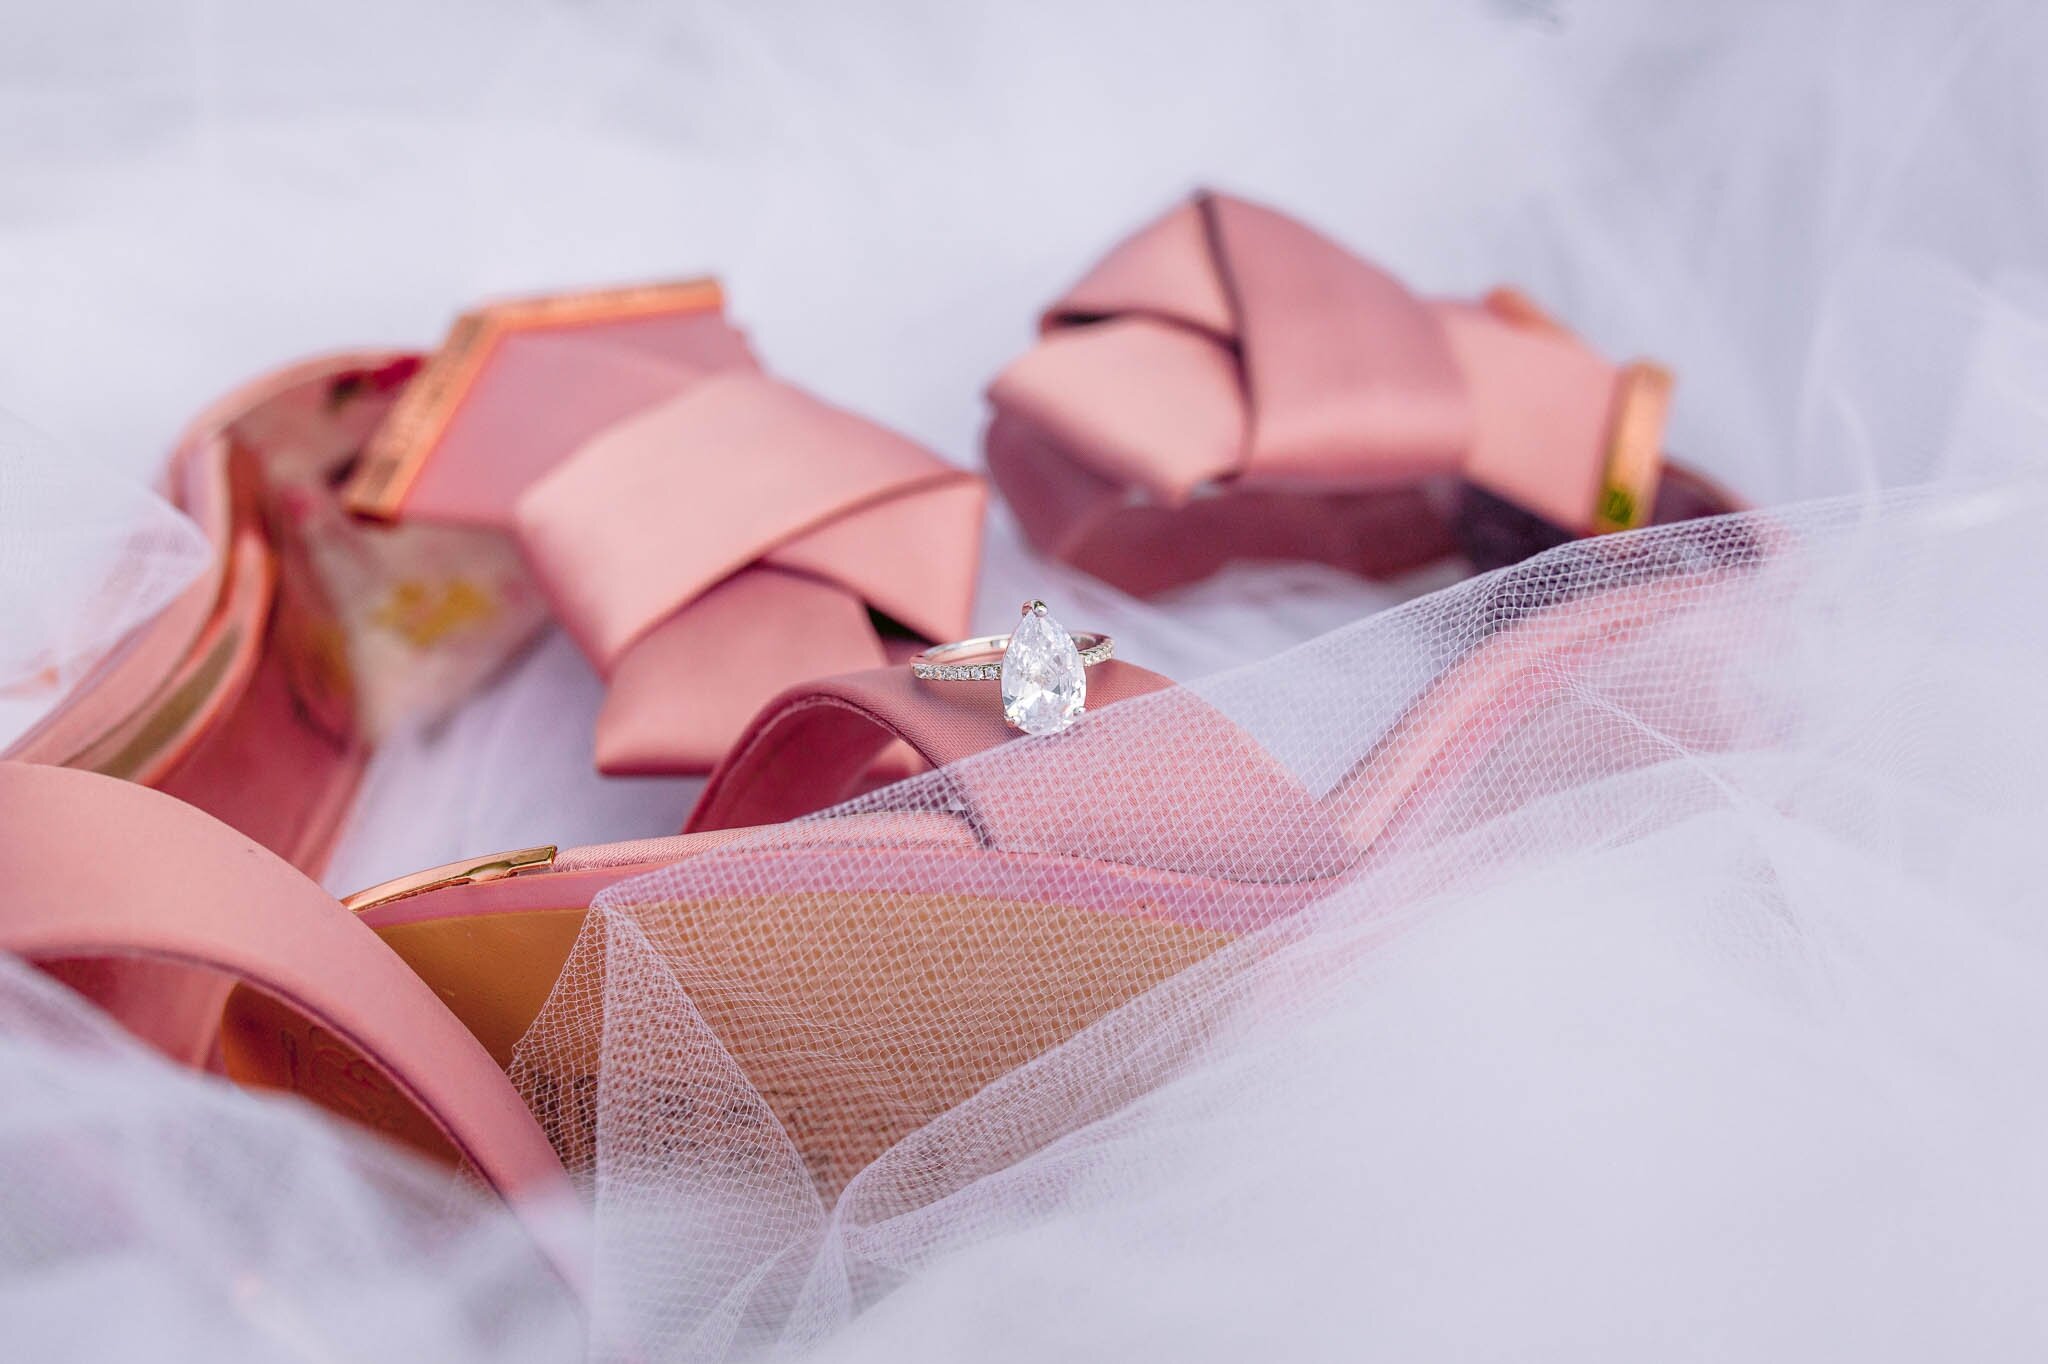 Pink and Blush Wedding Shoes by Ted Baker with Tulle and diamond engagement ring - - Details -  Four Seasons Oahu at Ko Olina Wedding Inspiration - Kapolei, Hawaii Photographer 